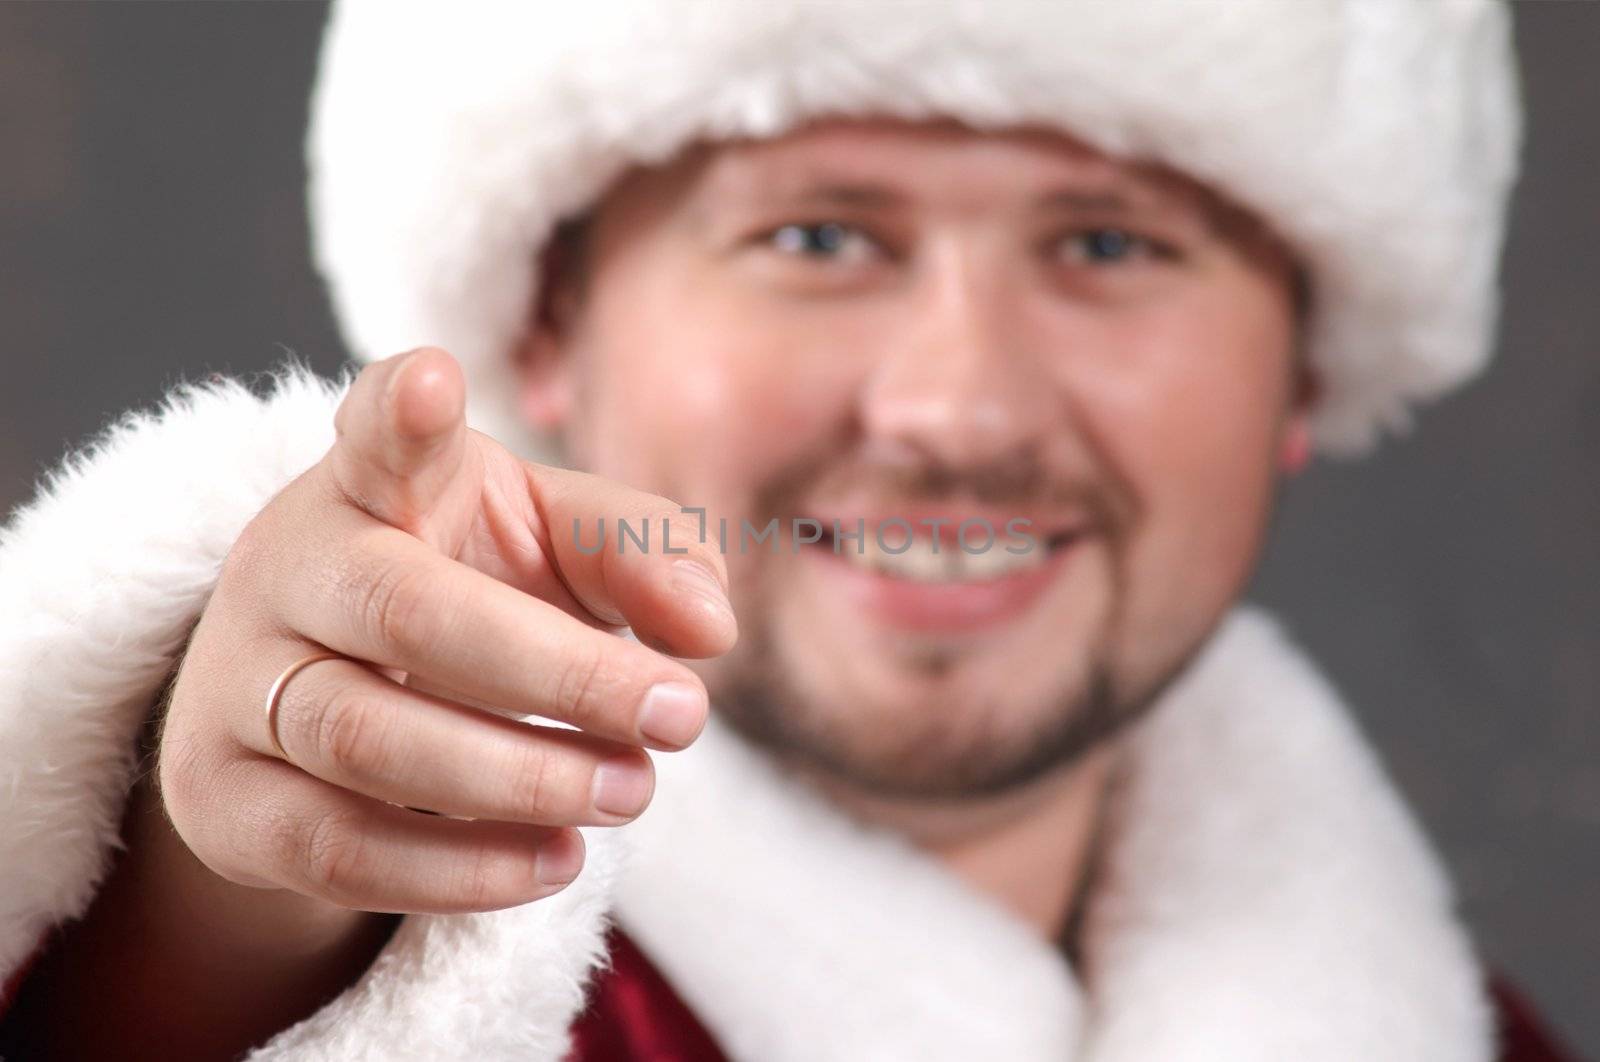 An inage of Santa Claus showing his forefinger